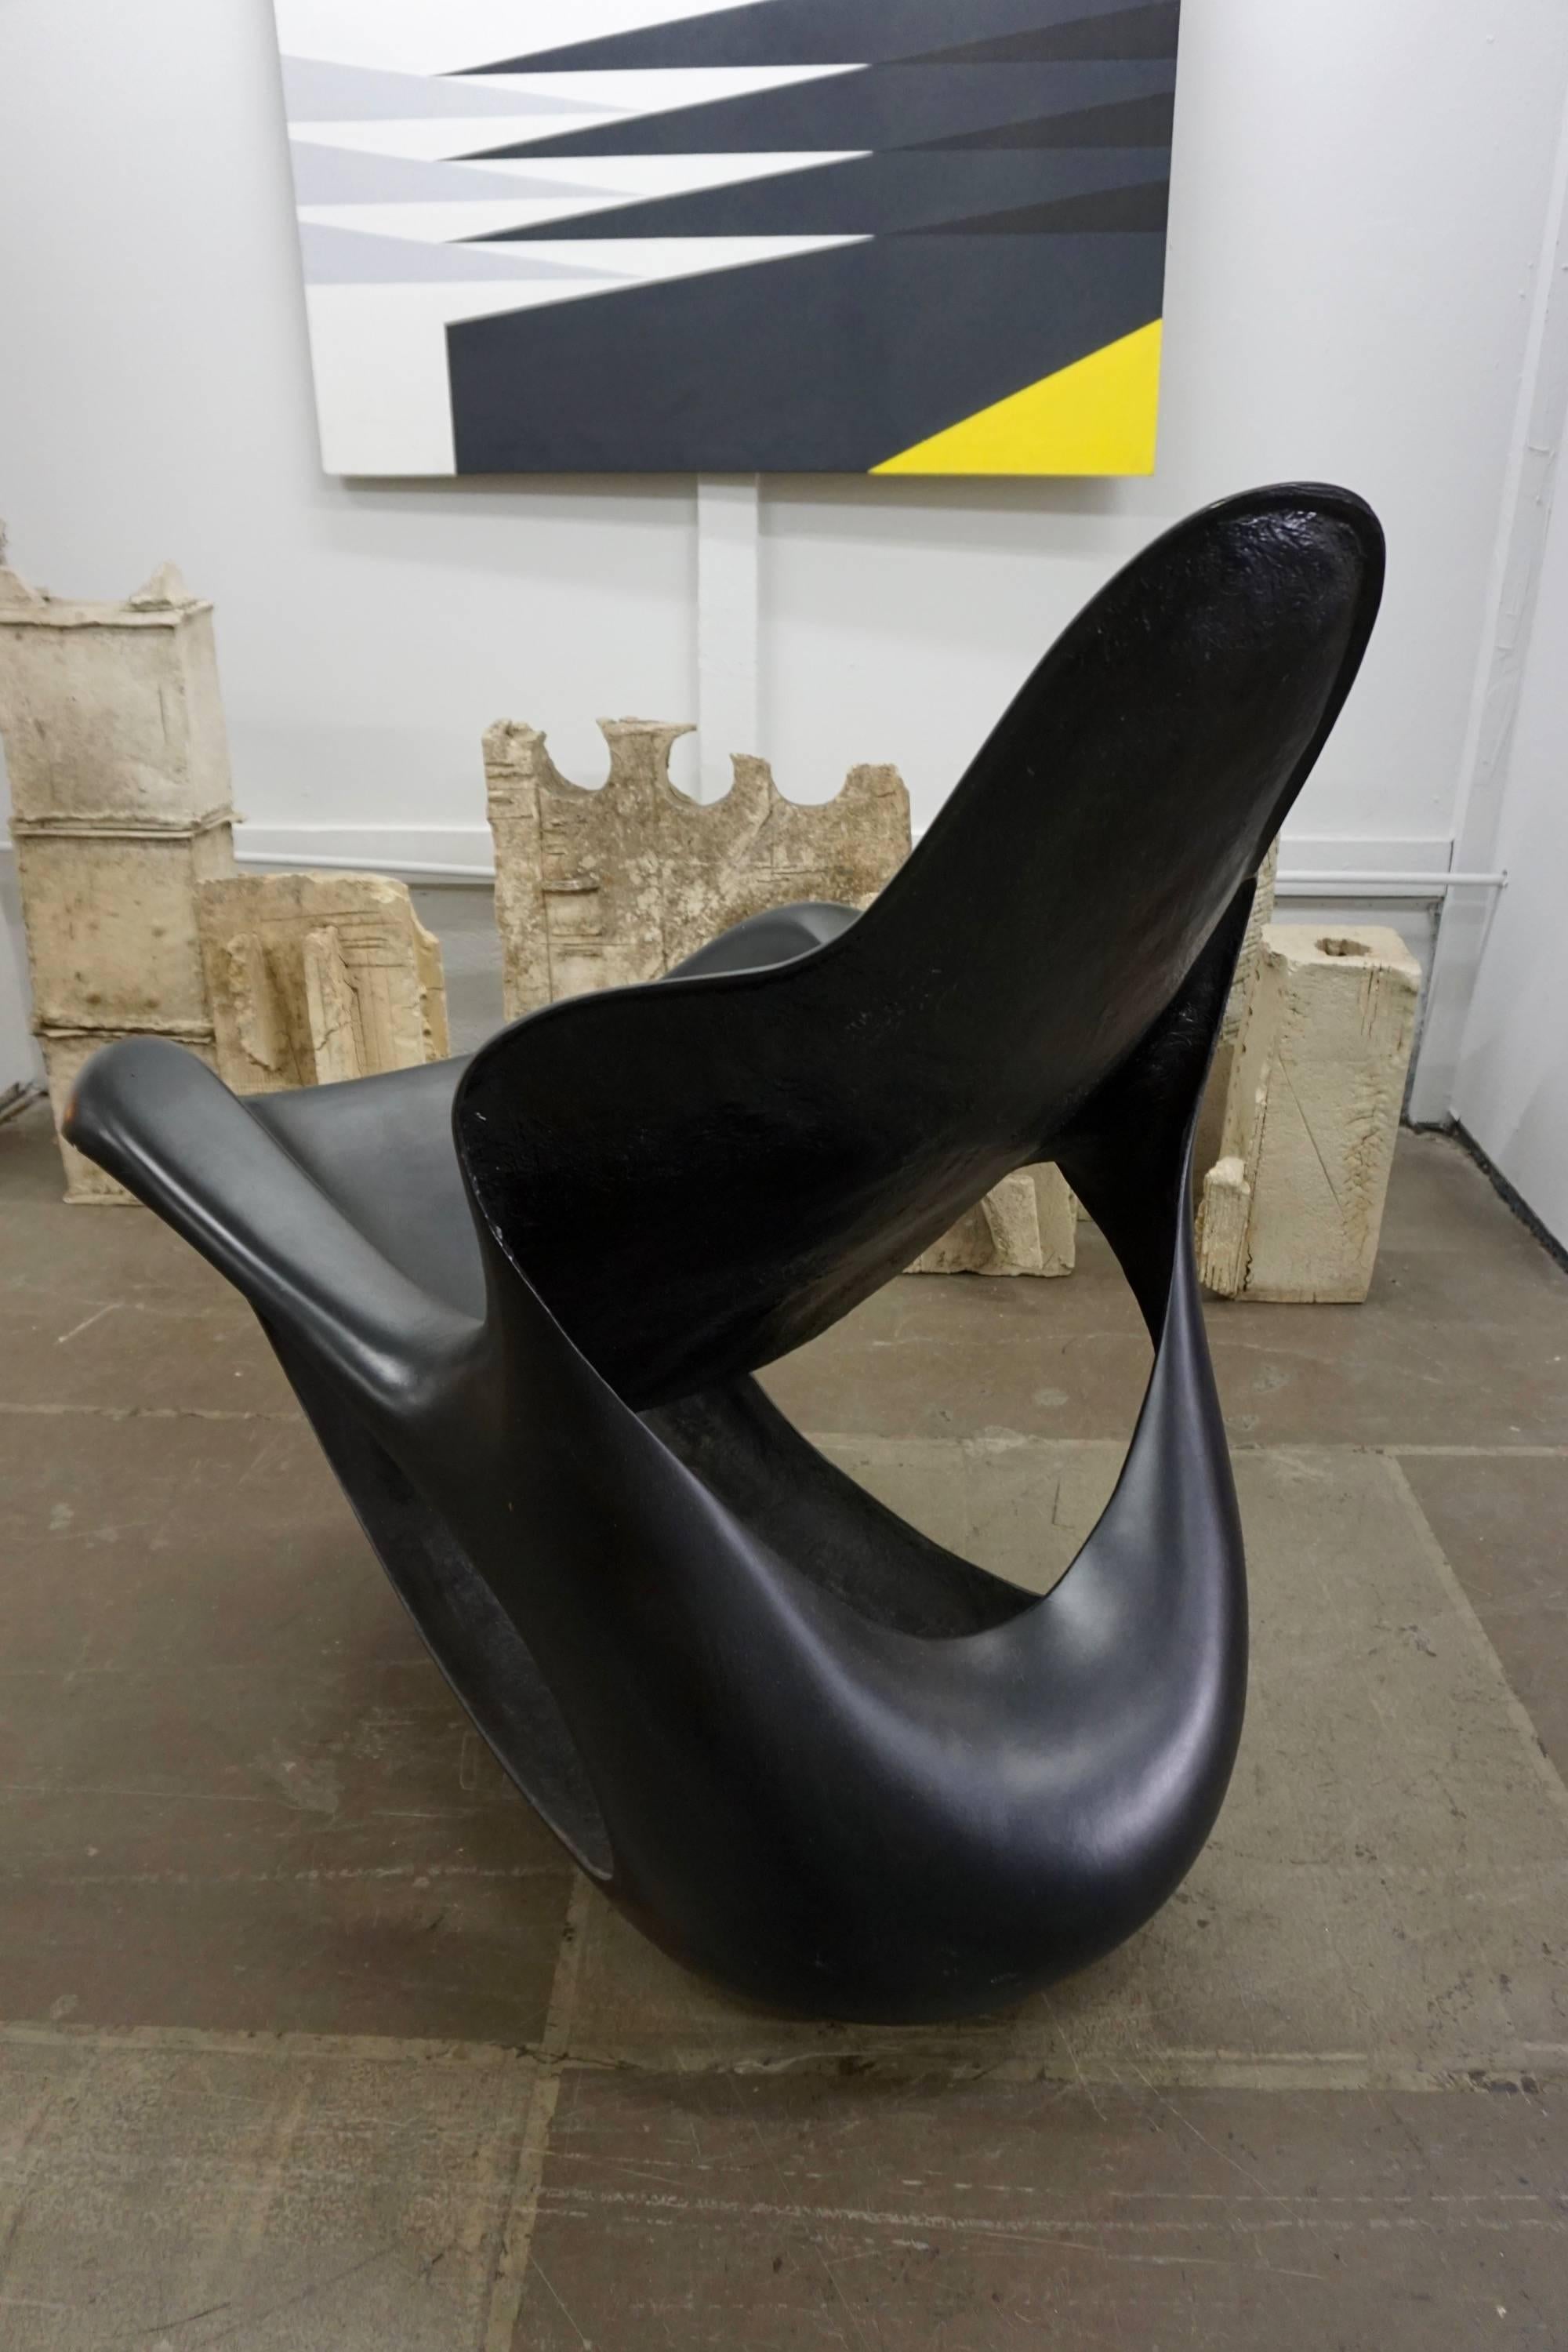 Moulded black, stylish rocker, sculptural, comfortable and conducive to any indoor or outdoor setting.